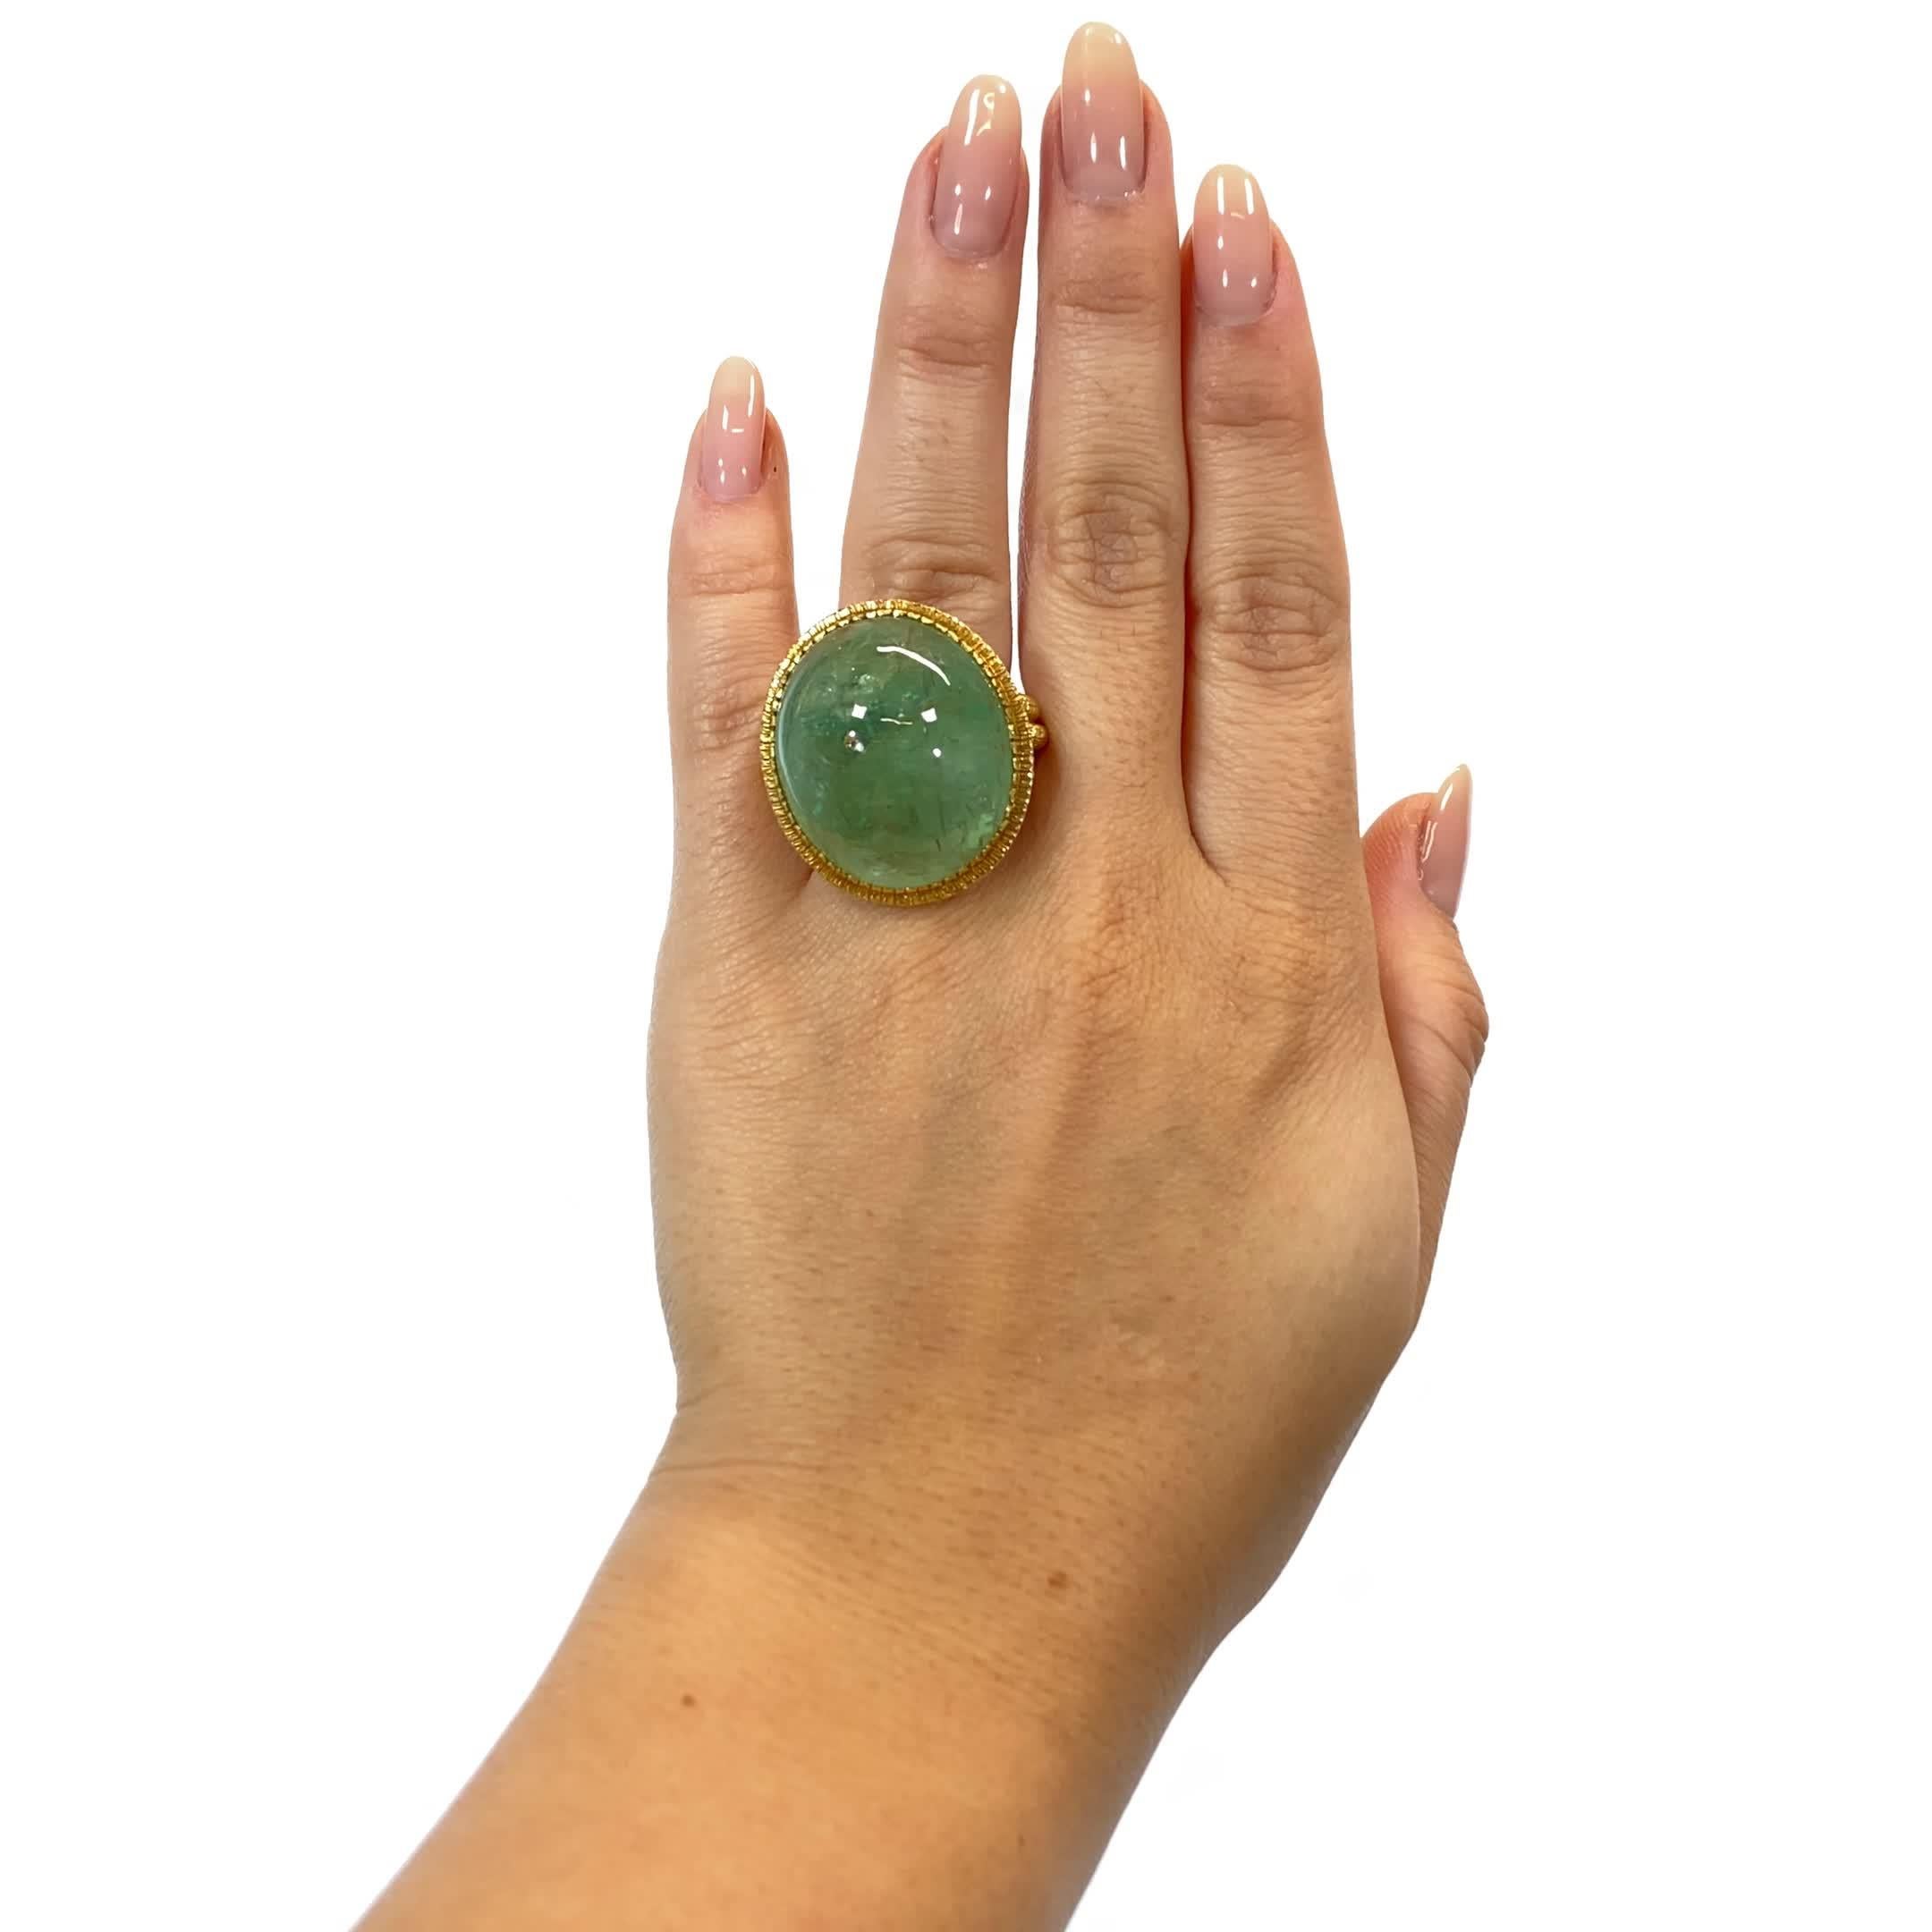 Vintage Emerald 18 Karat Gold Cocktail Ring. The ring features a cabochon cut emerald, approximately 56.00 carat. Circa 1980s. Size 5 and may be resized.

About The Piece: Feel yourself like a Greek Goddess, sipping wine under the olive tree with